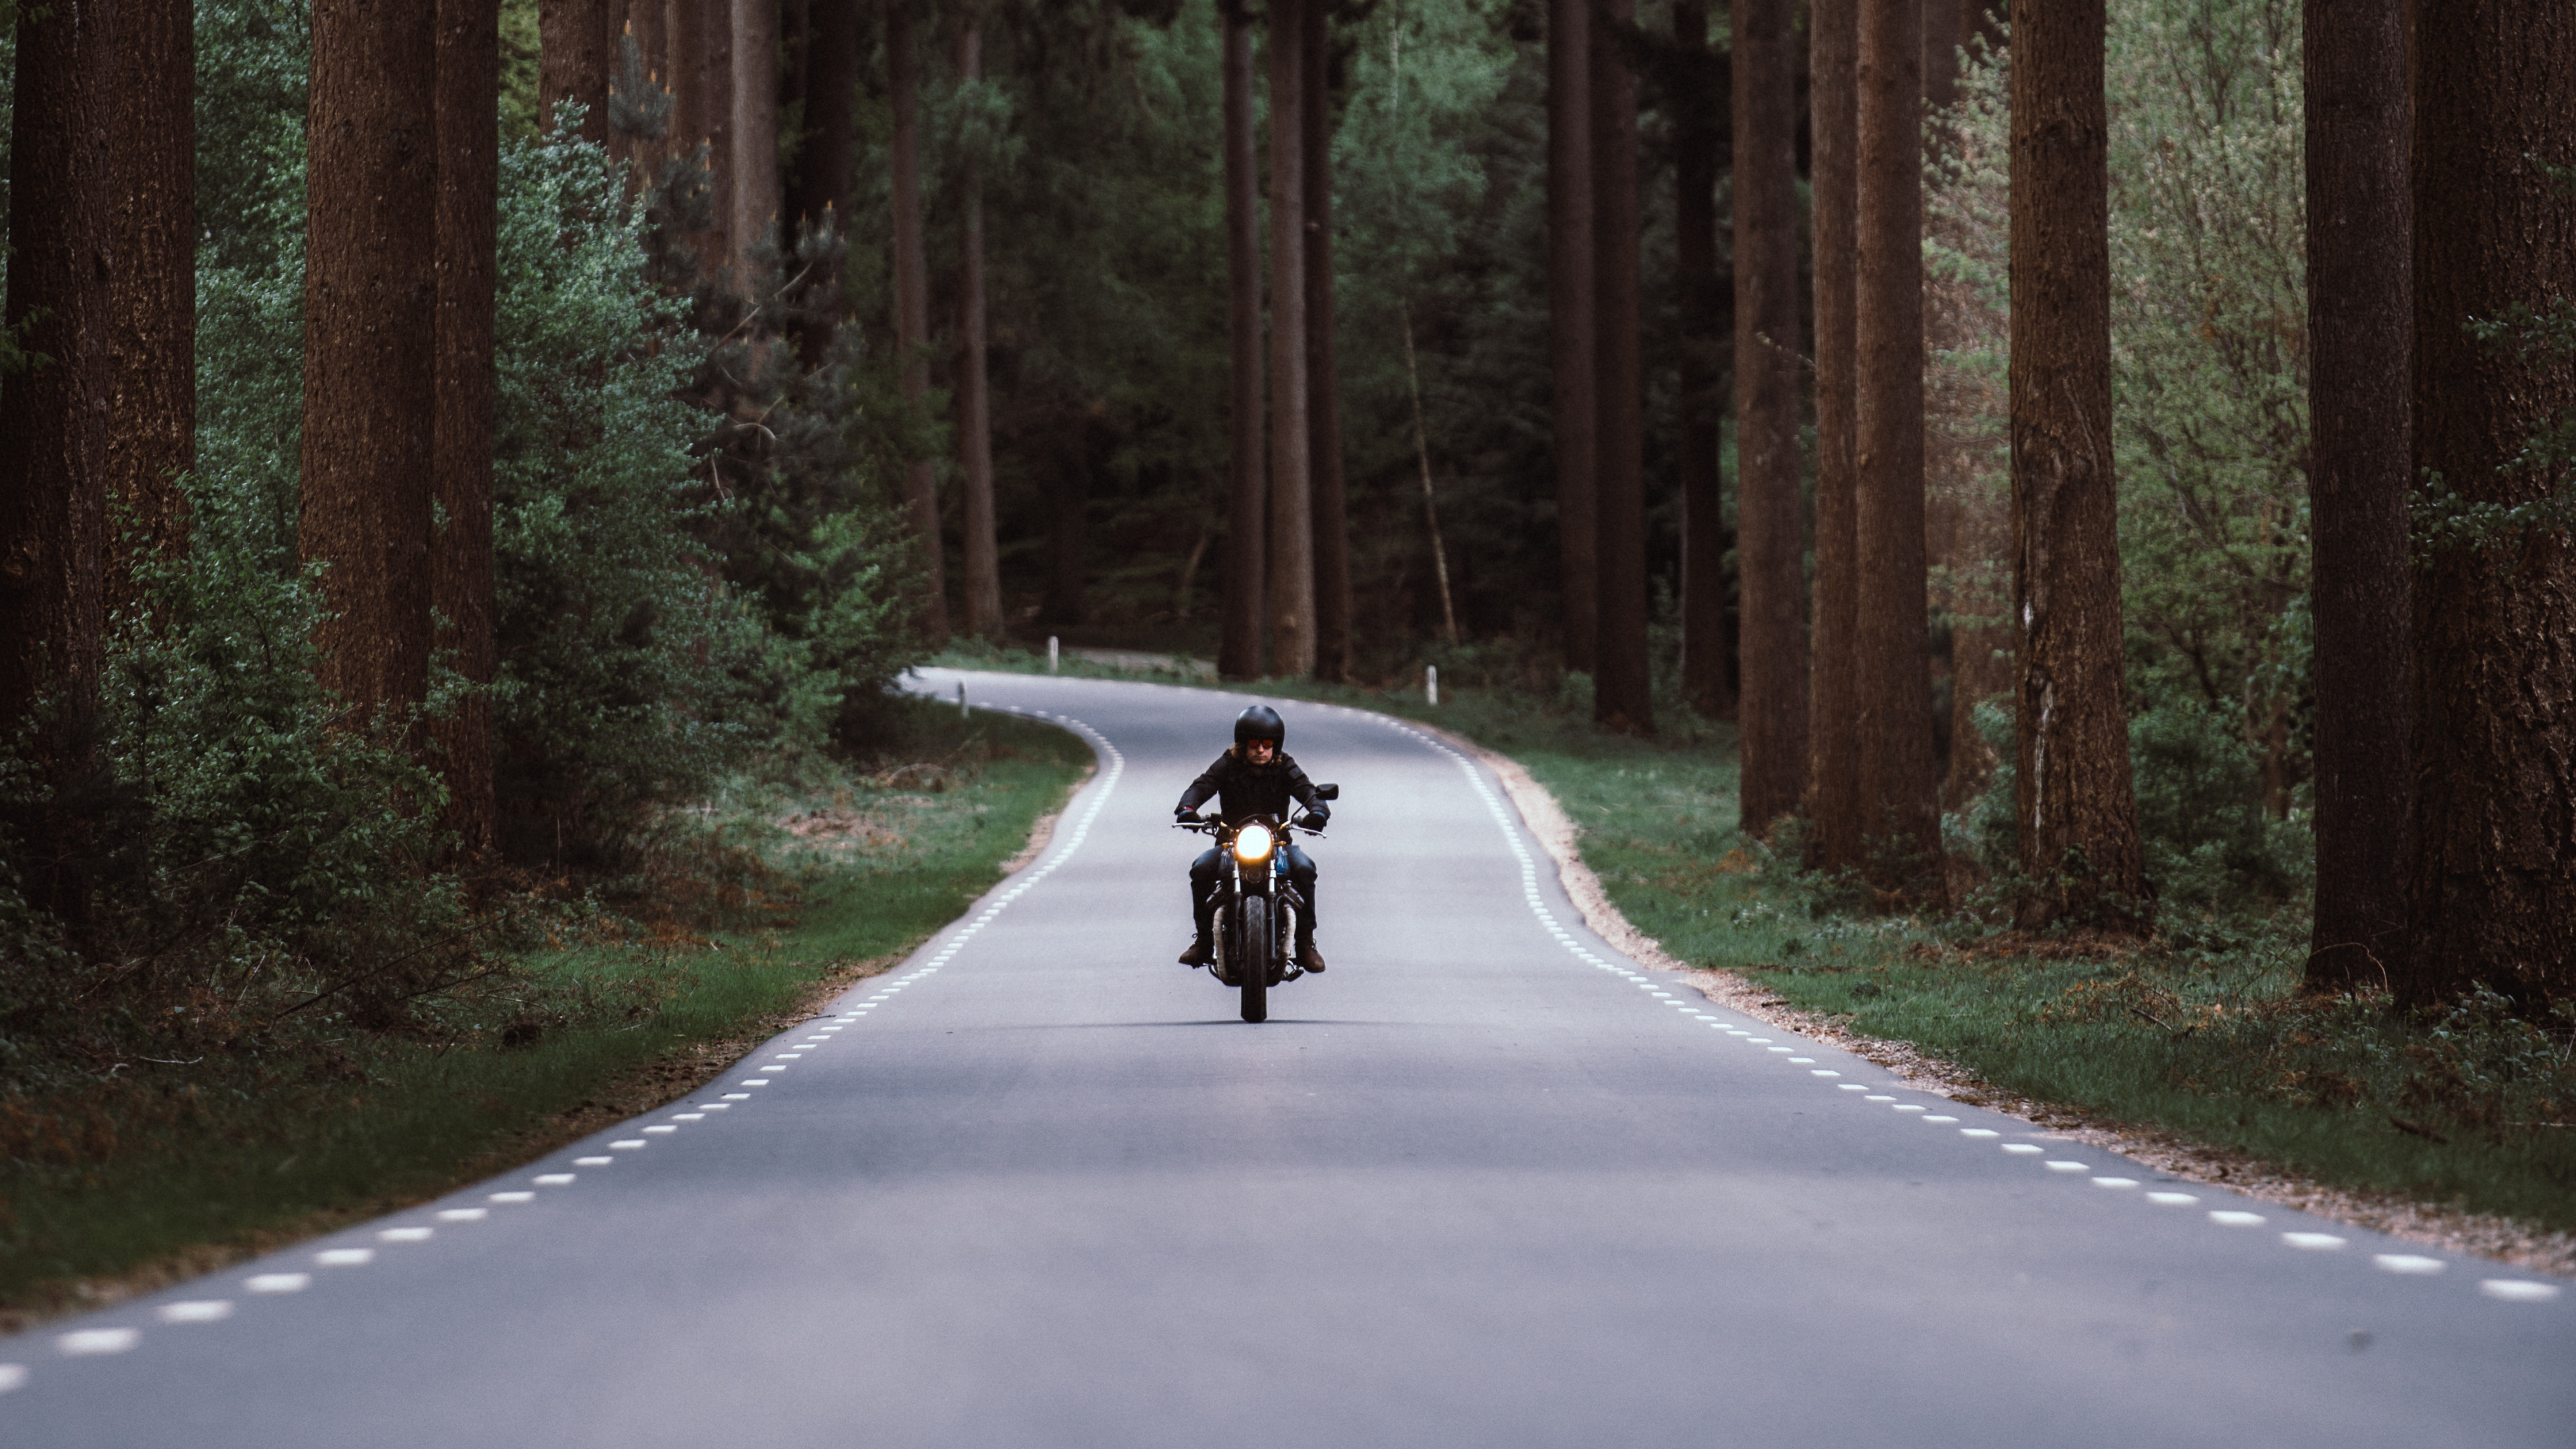 Person Riding Motorcycle on Road Between Trees During Daytime. Wallpaper in 3840x2160 Resolution